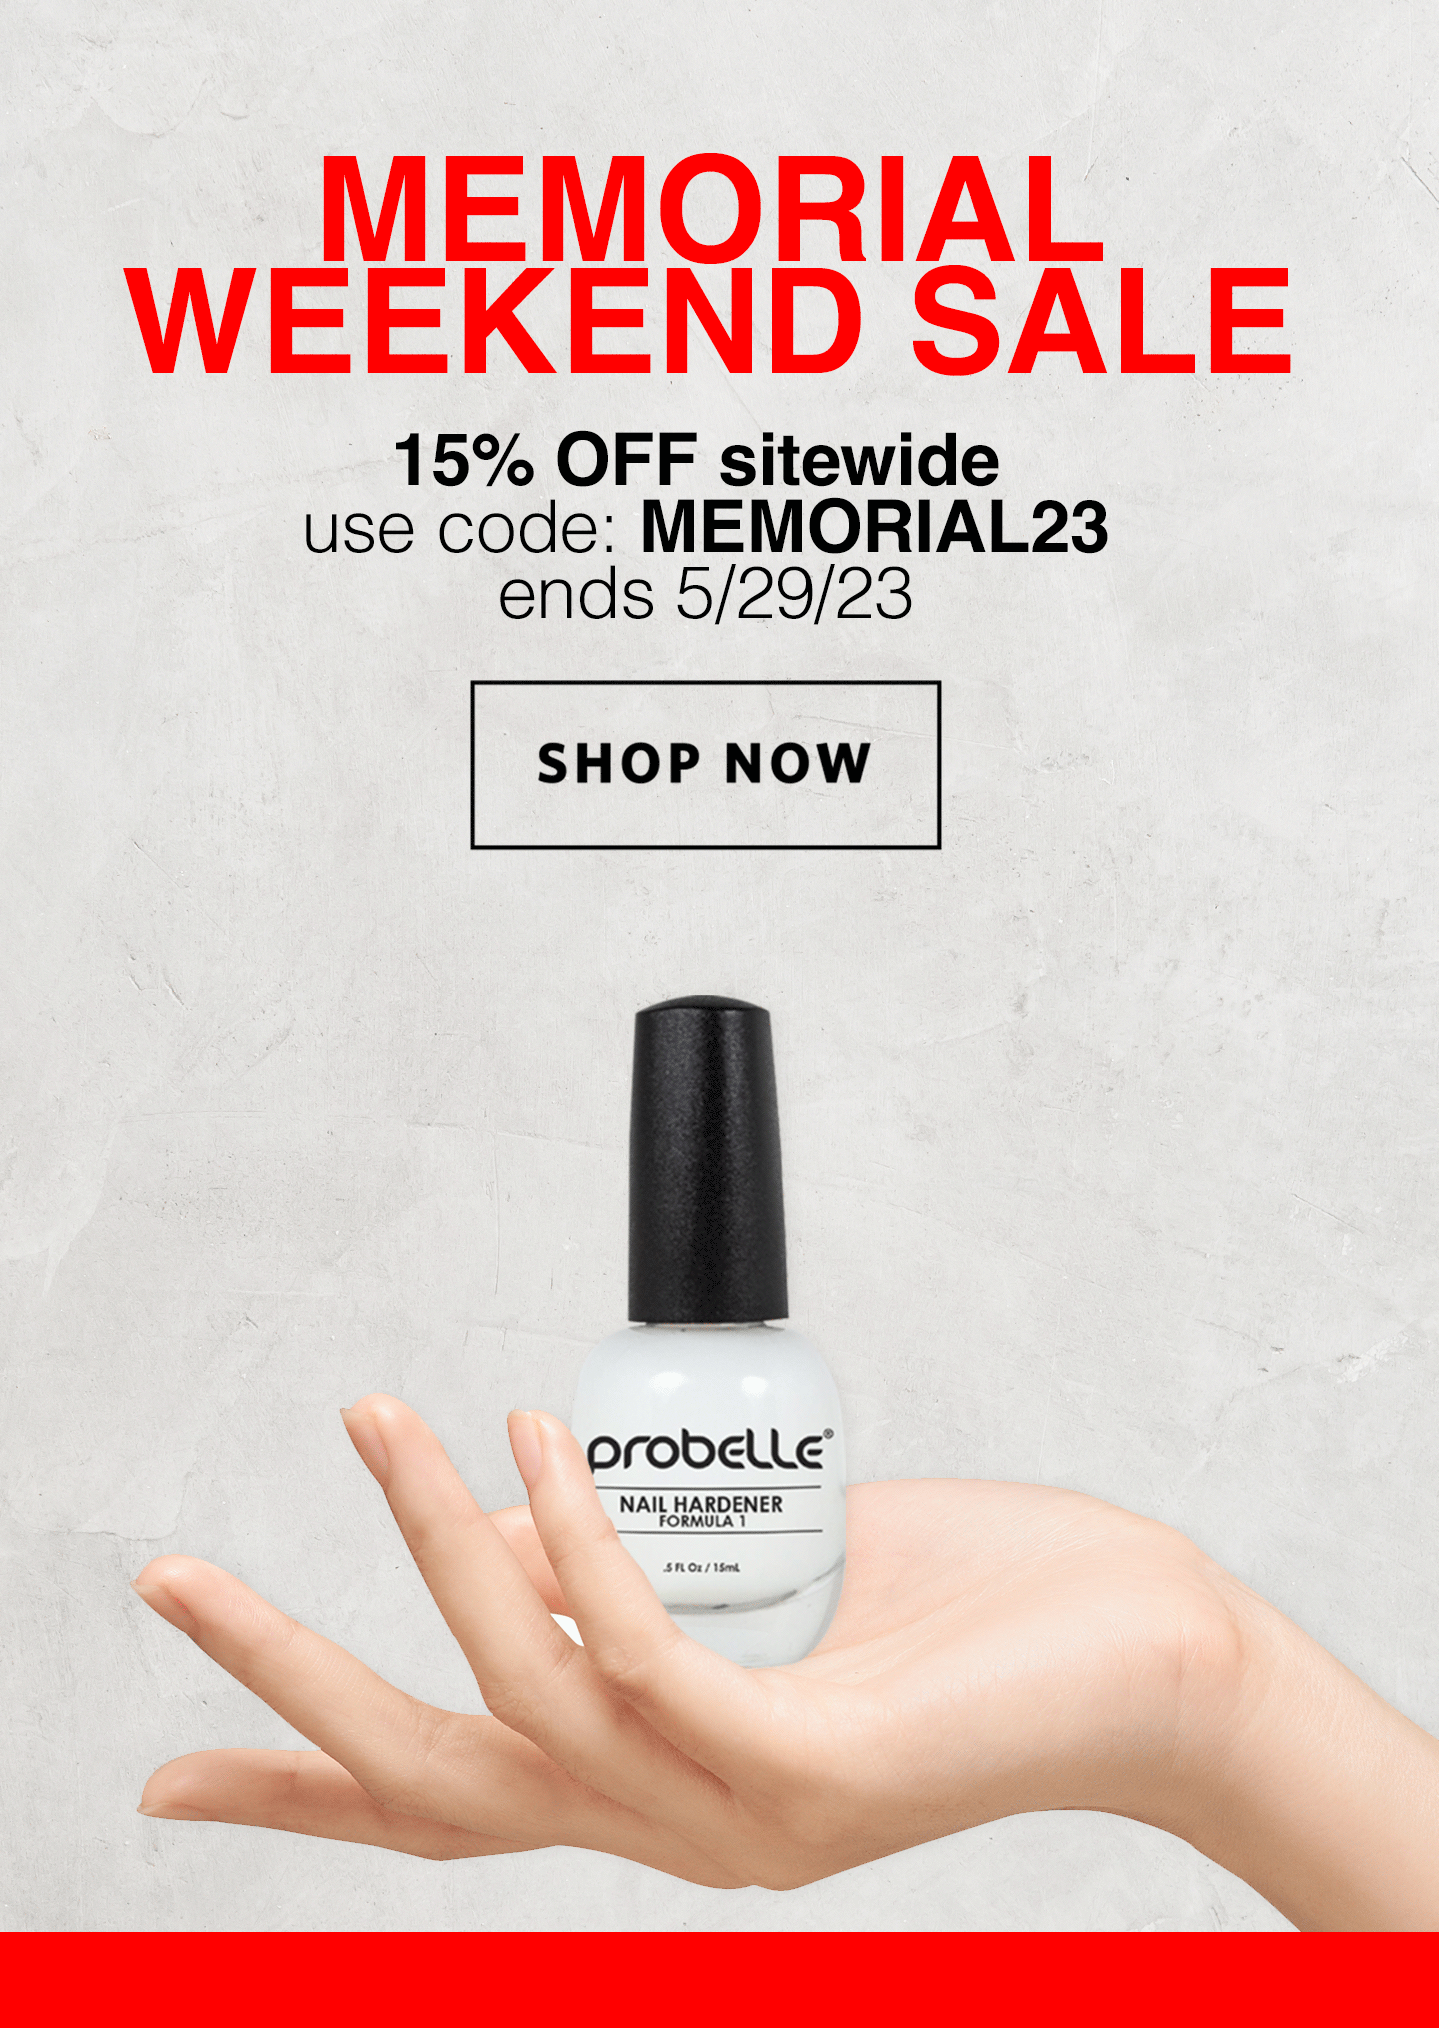 ENTER CODE "Memorial23" AT CHECKOUT TO SAVE 15% OFF SITEWIDE SALE ENDS AT MIDNIGHT on 5/29/23